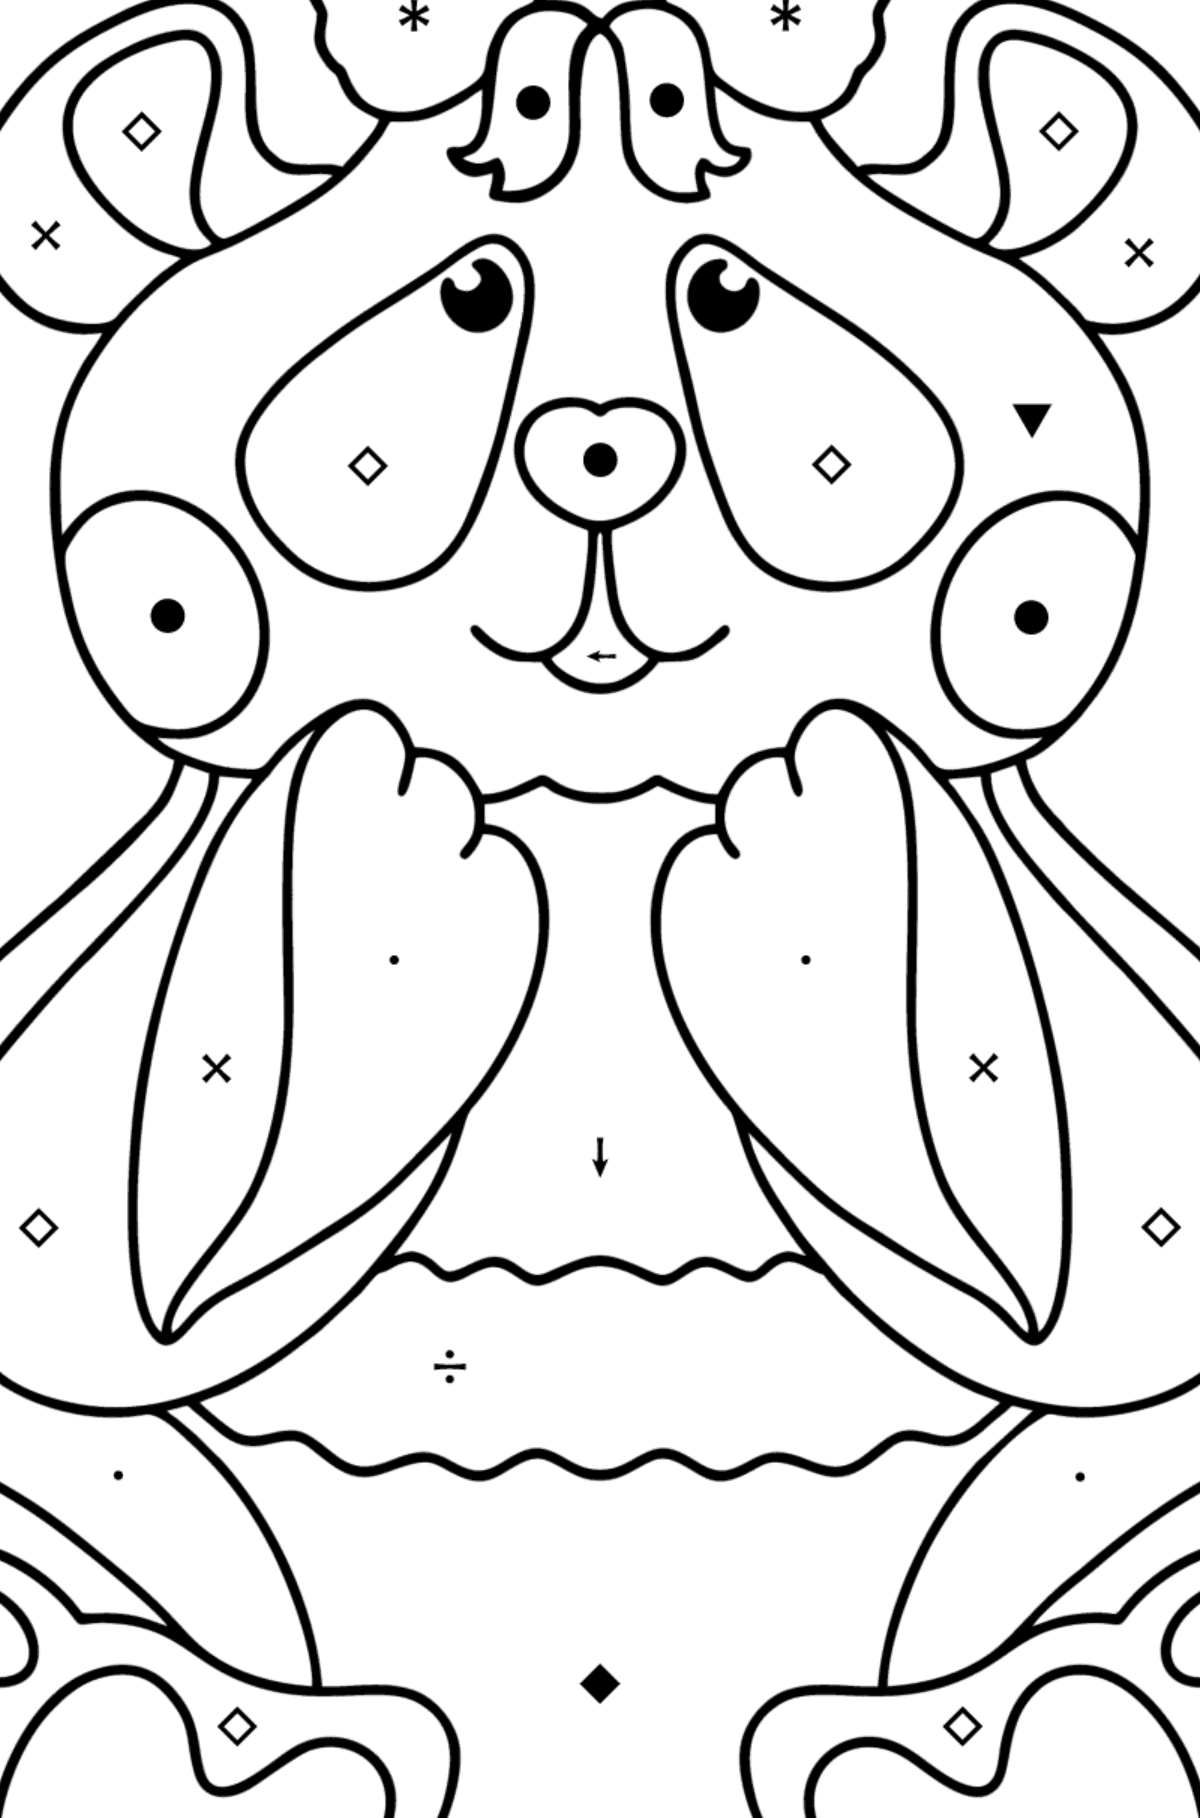 Panda baby coloring page - Coloring by Symbols for Kids